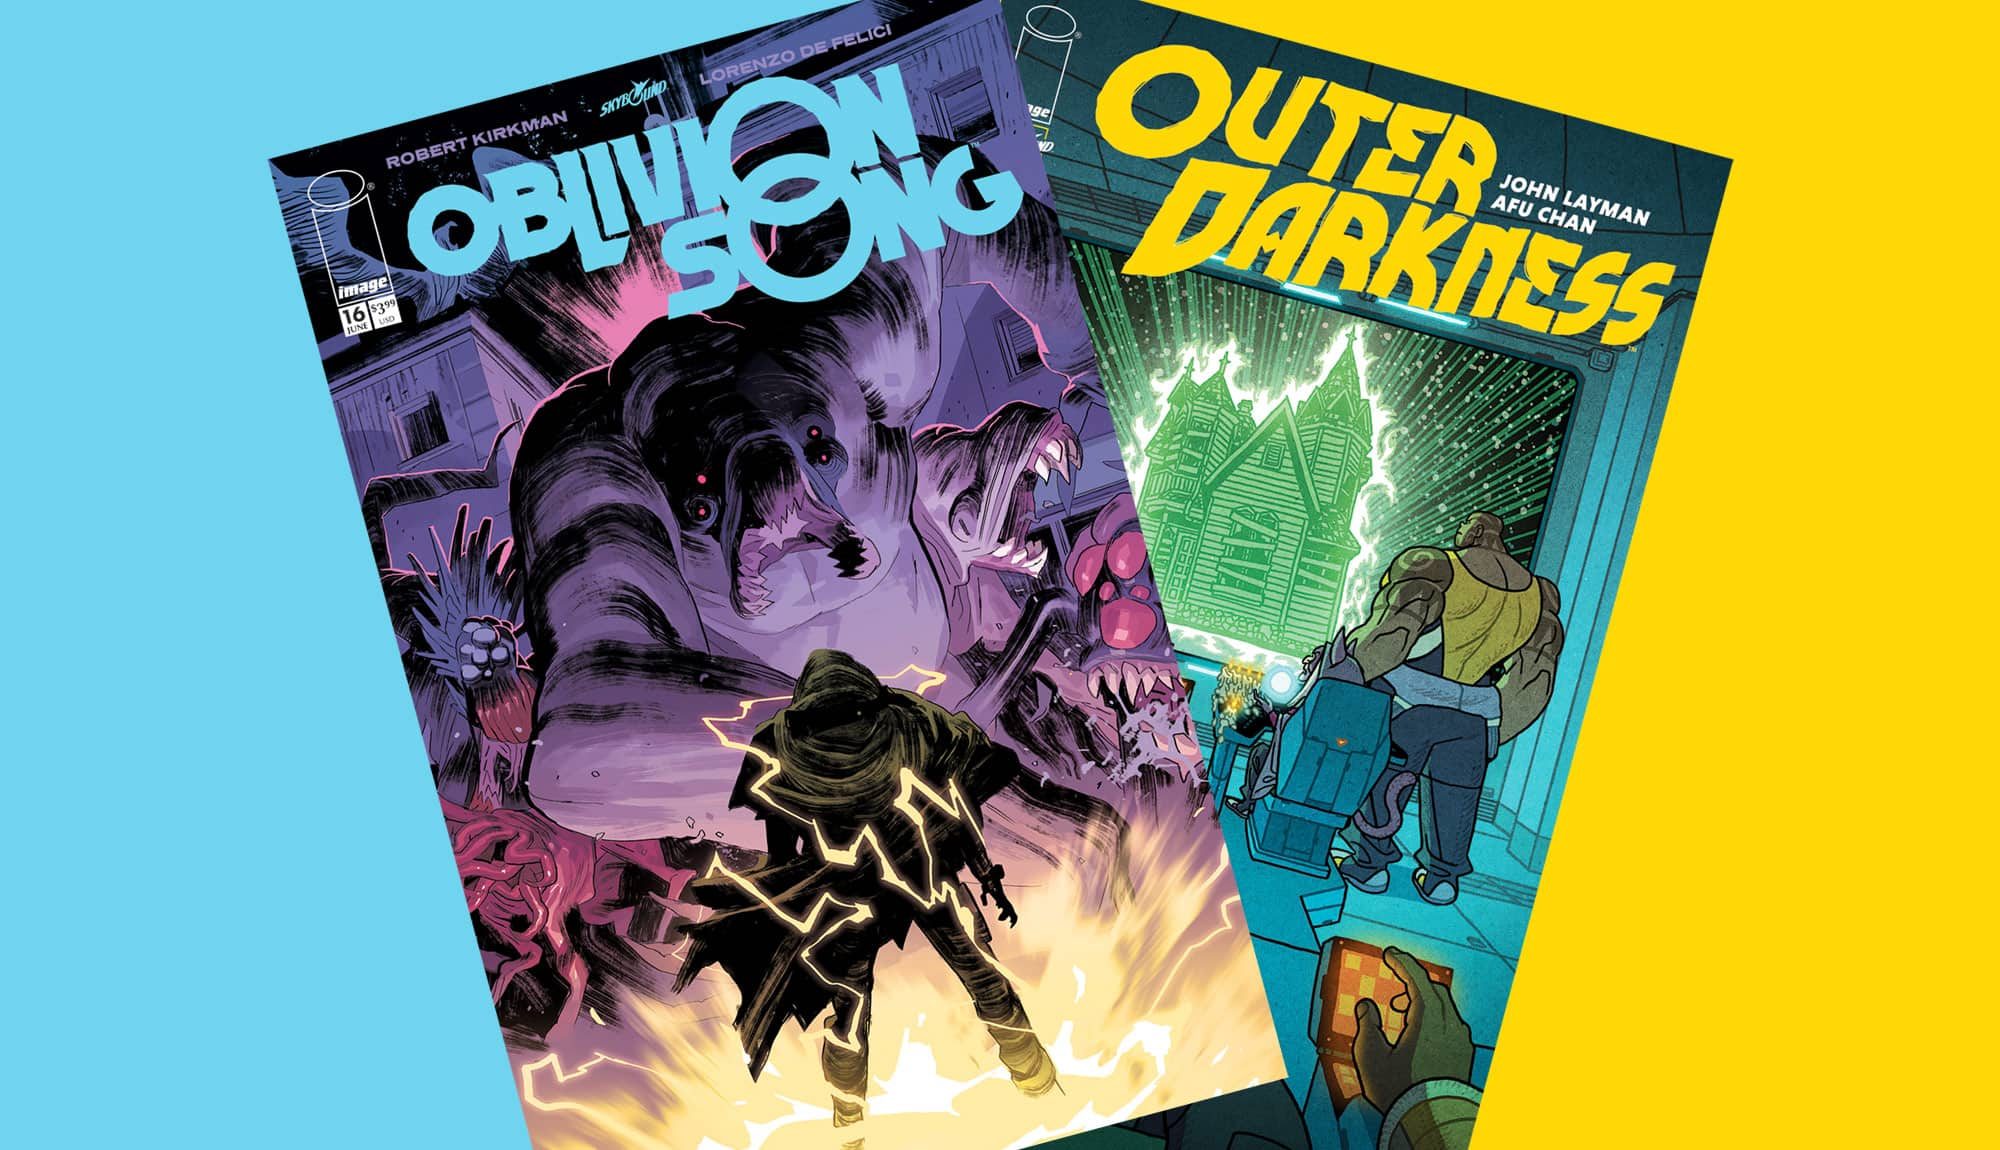 This Week’s Comics: OBLIVION SONG, OUTER DARKNESS